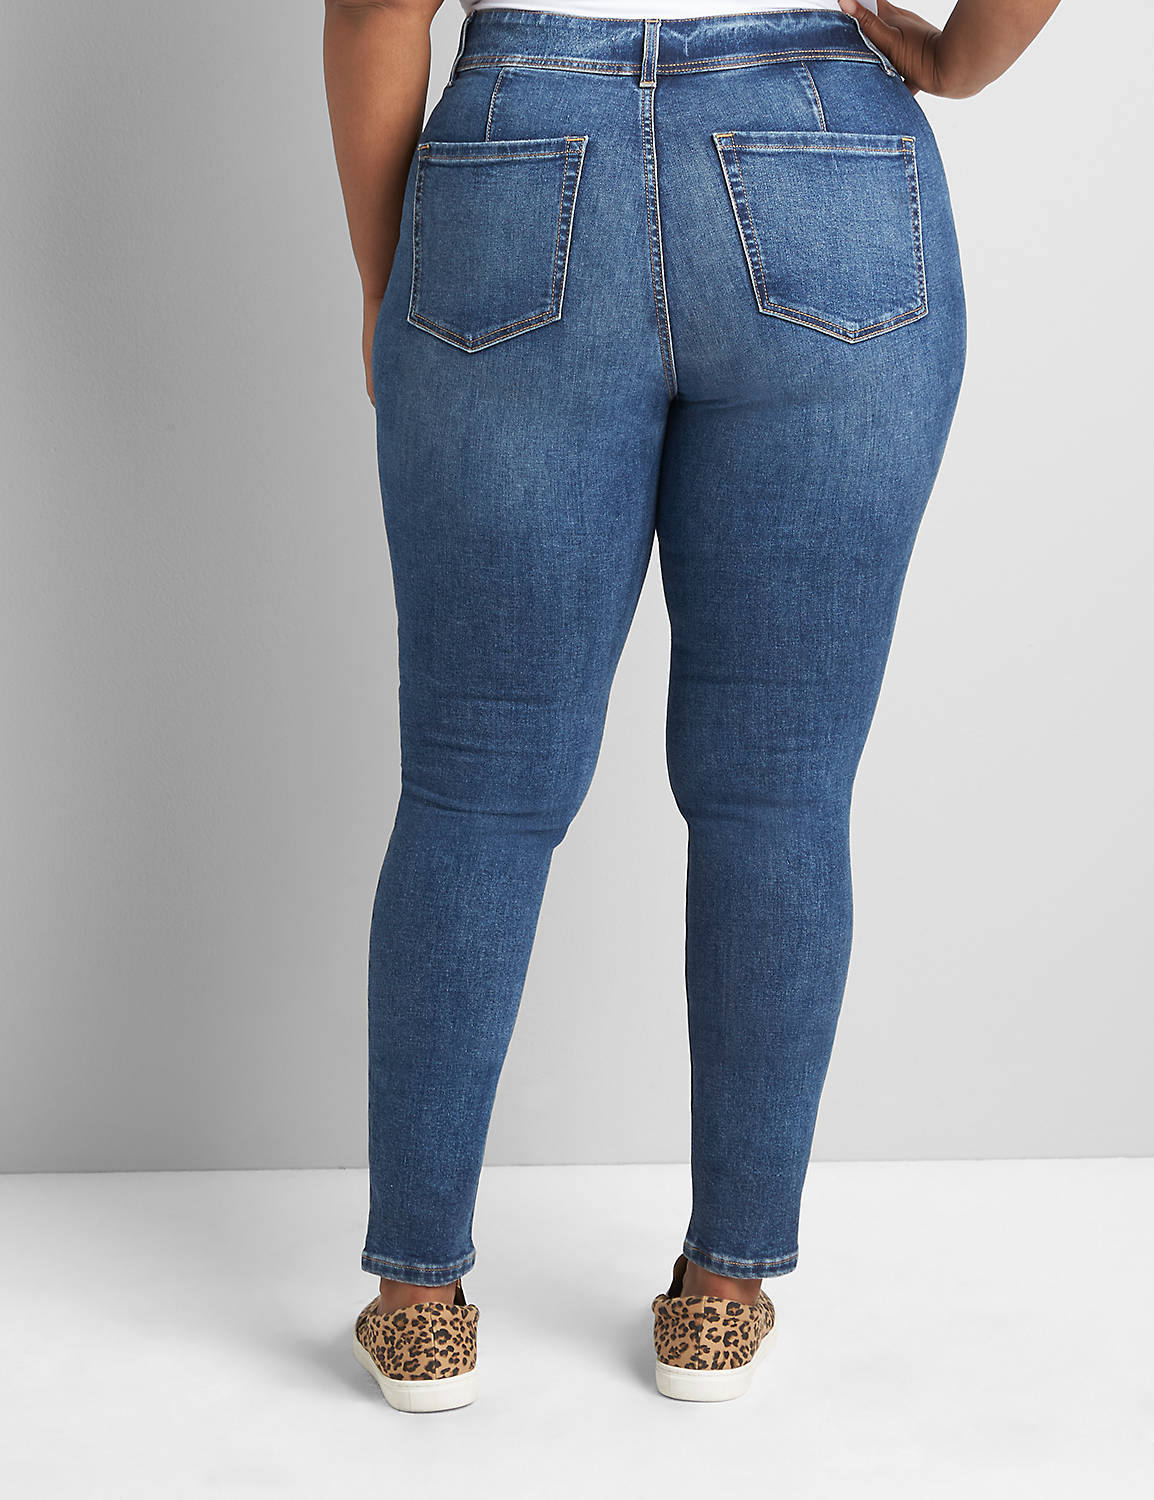 SIGNATURE FIT HIGH RISE 3 BUTTON JEGGING - CANDY WASH 1121759:Dark Denim:18 Product Image 2